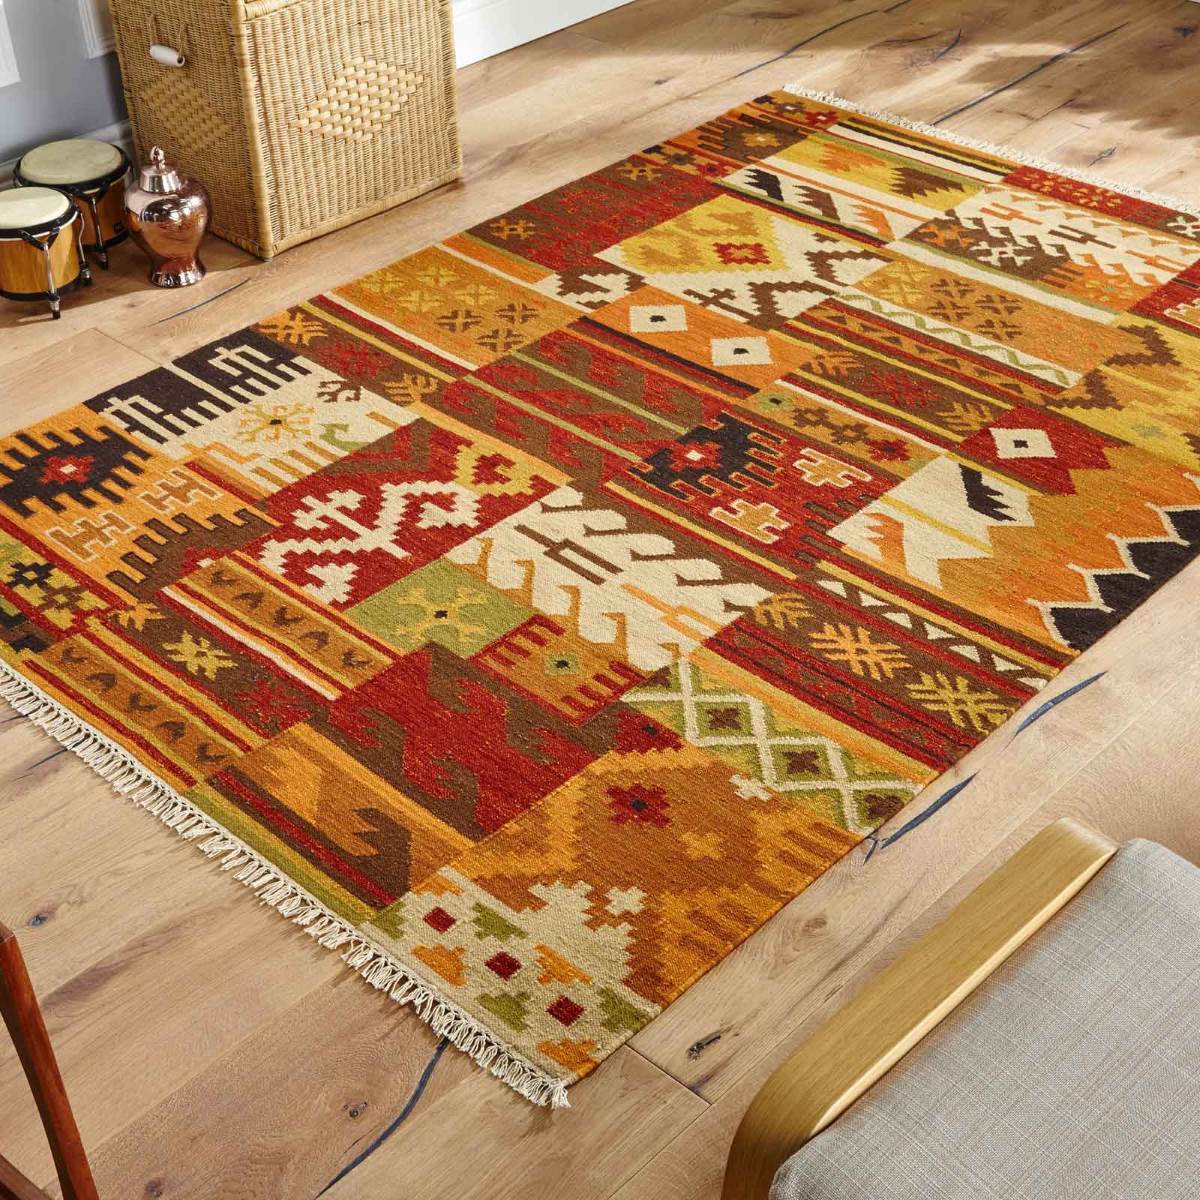 What Are Kilim Rugs Made Of